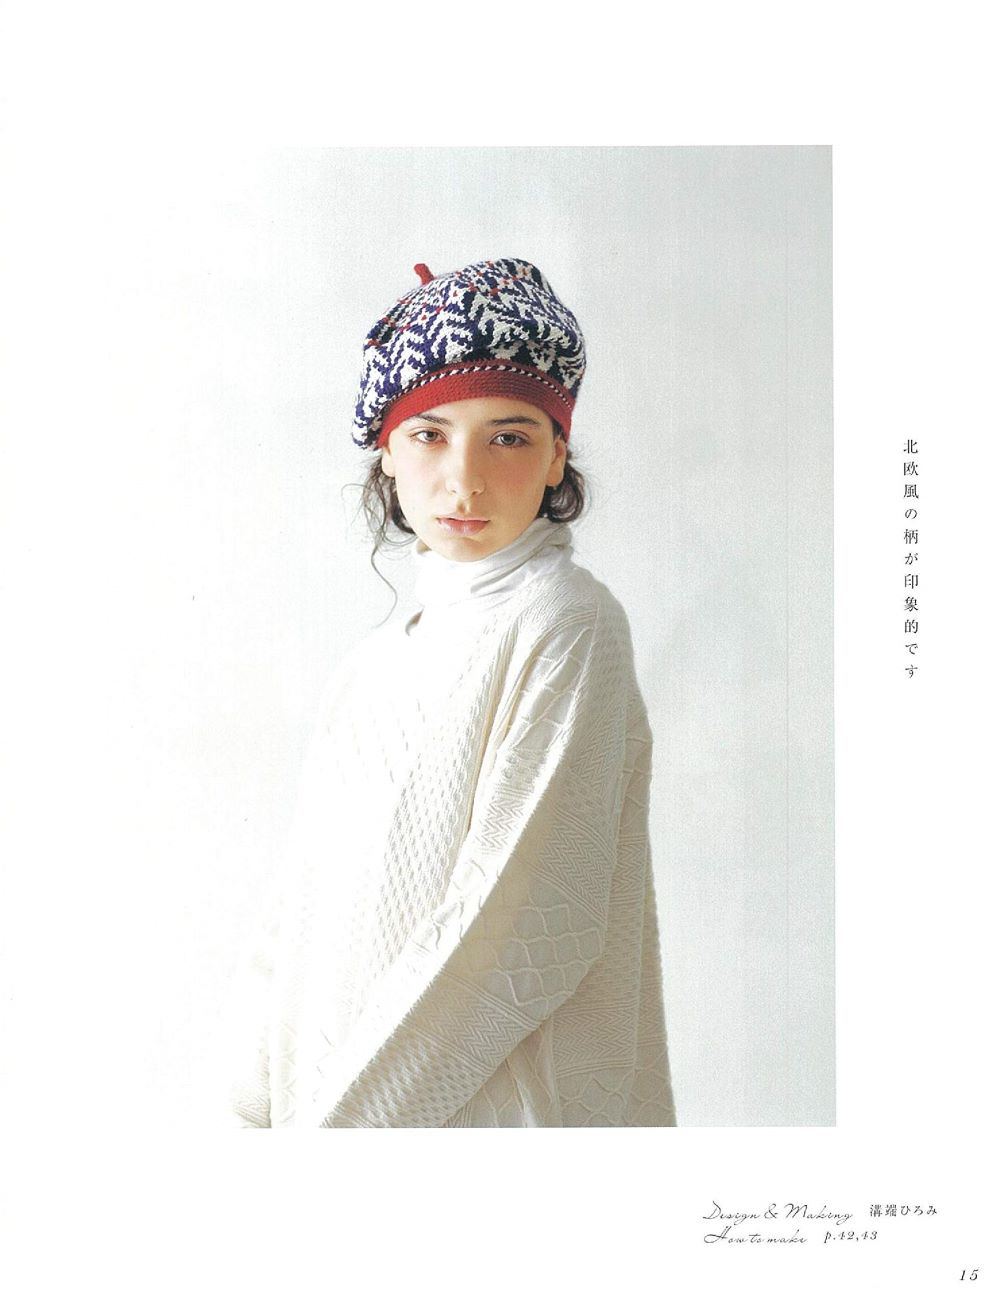 Crochet knit cap with a woven pattern